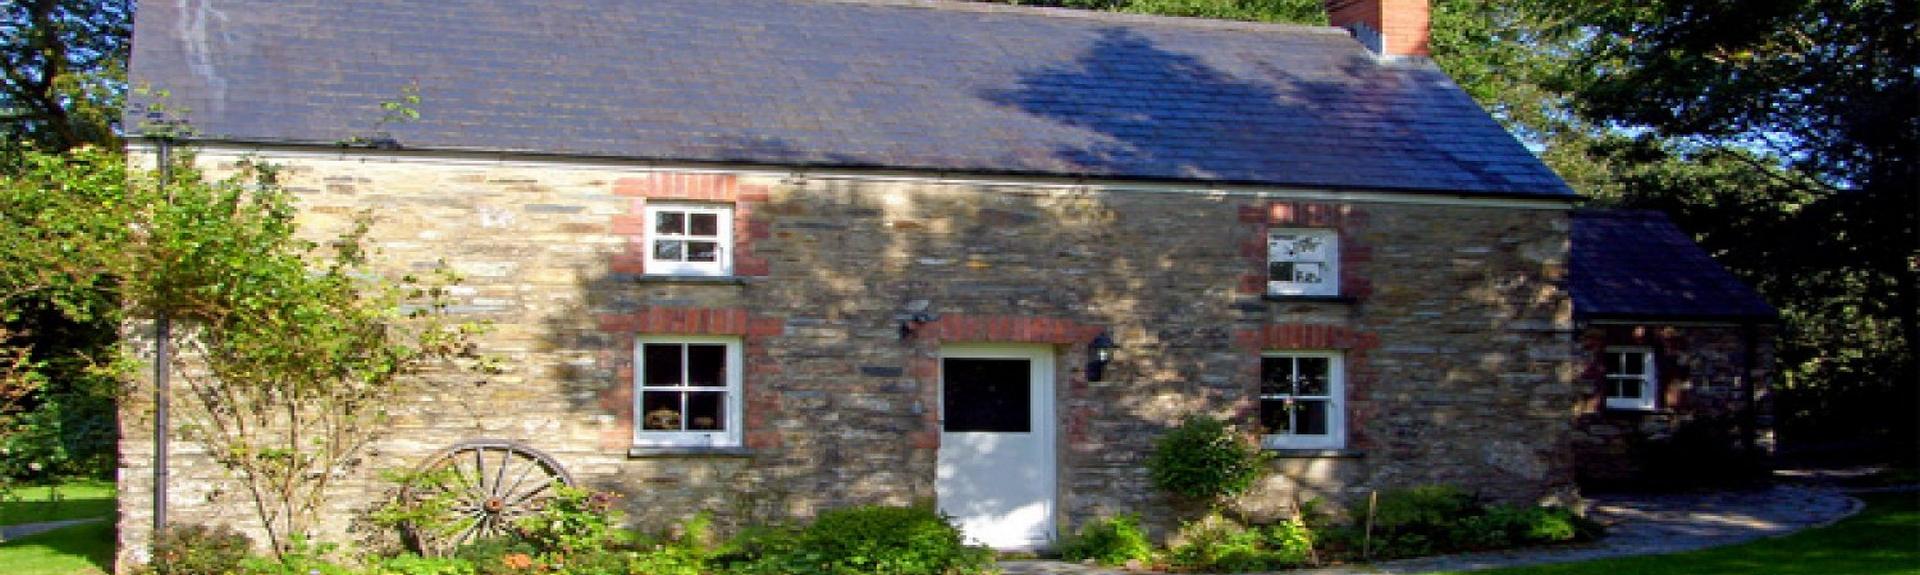 The exterior of  stone-built Welsh farmhouse overlooking  lawn with tall tree to its side and rear. an old cart wheel leans against the wall of the house.